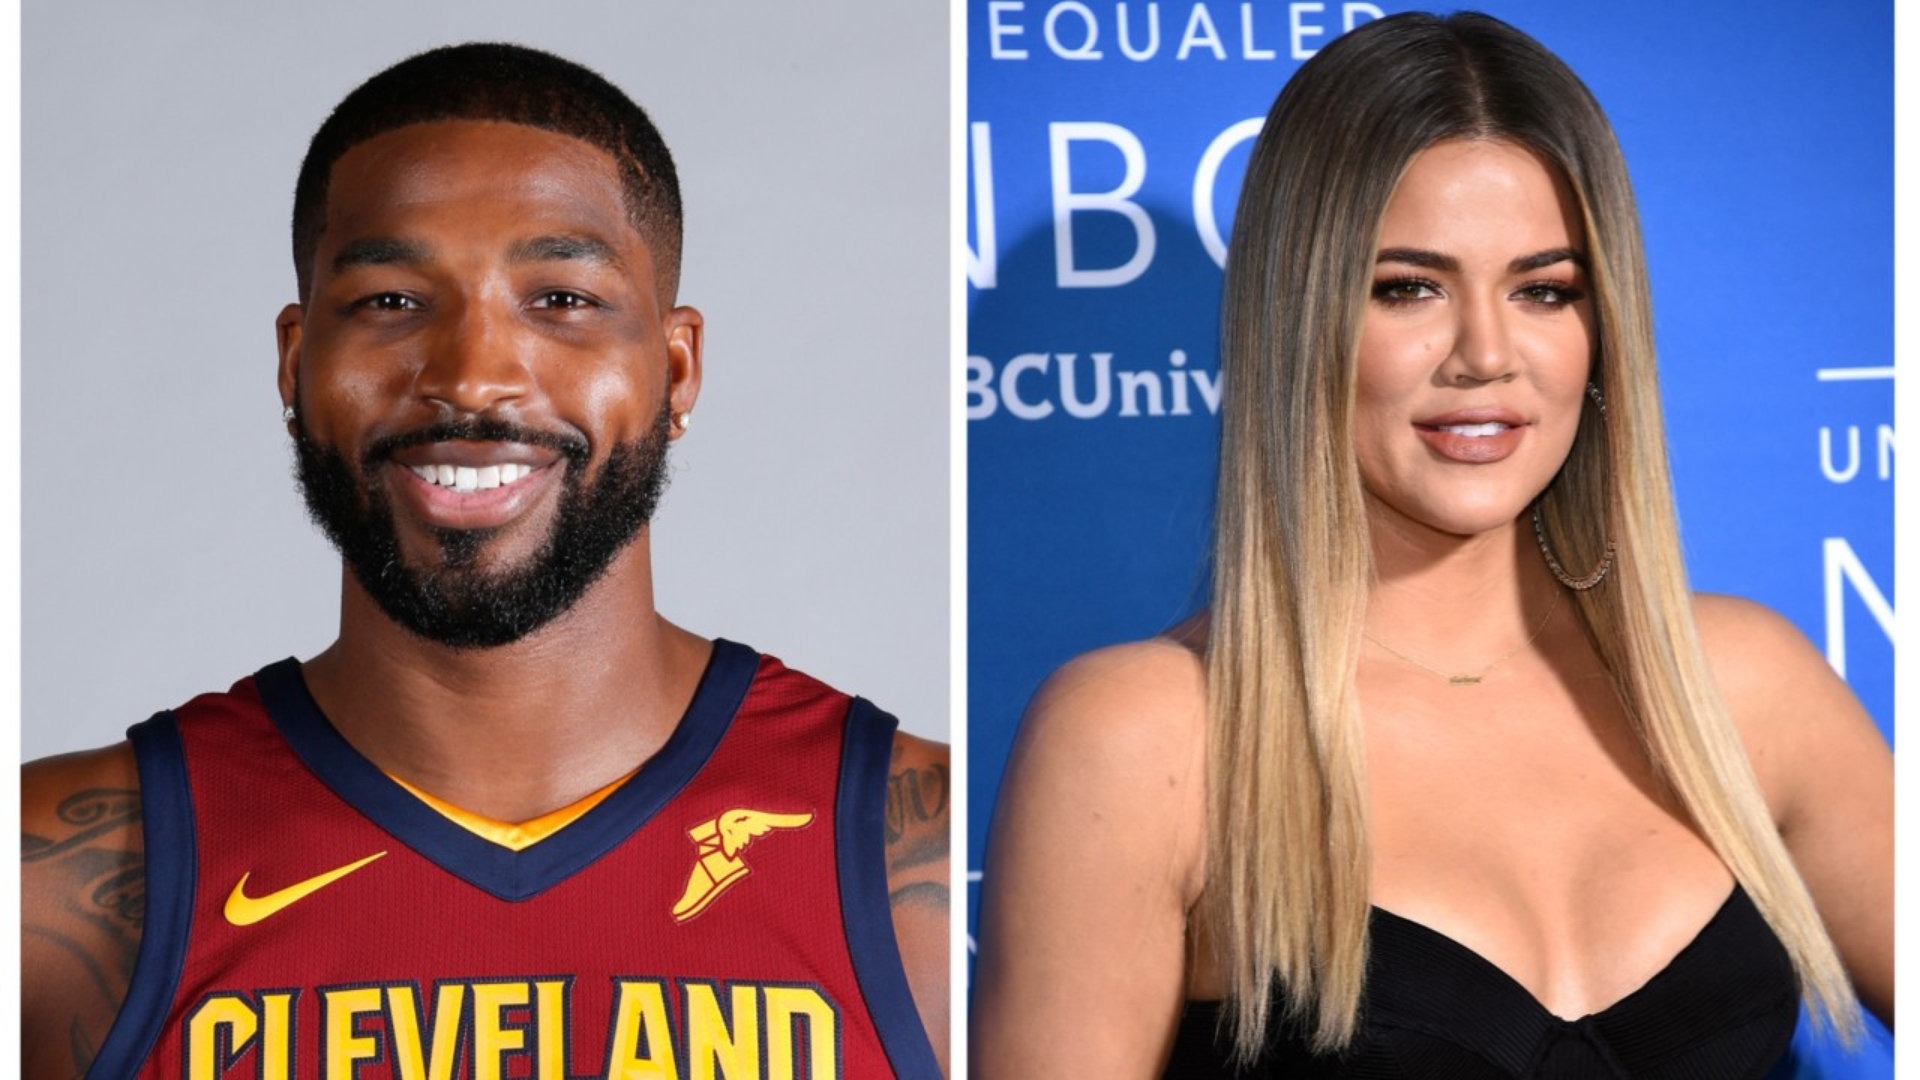 Khloe & Tristan appear together in public second time to celebrate pal’s birthday